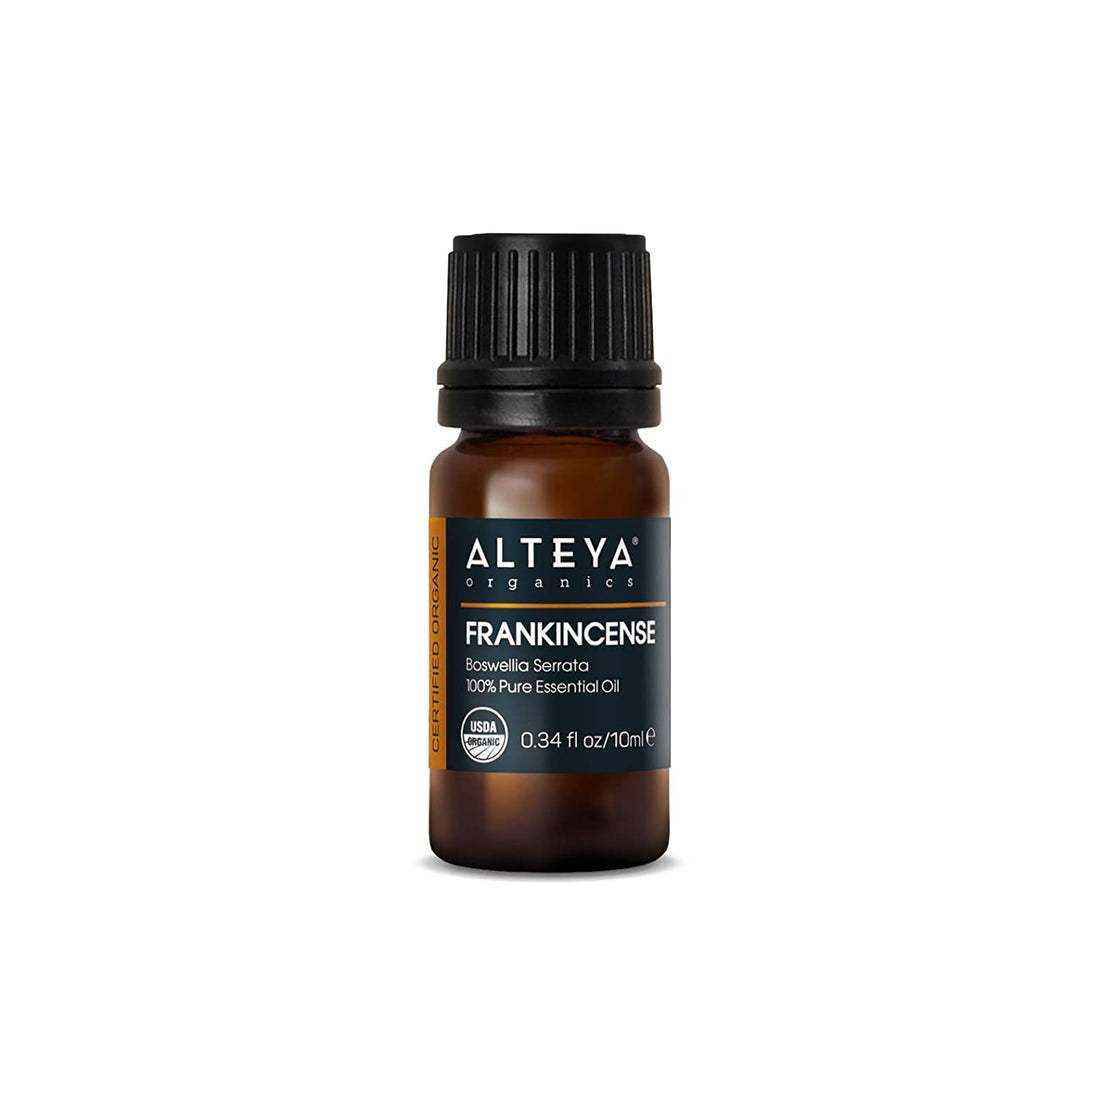 Alteya Organics Organic Frankincense Oil /Boswellia Carterii/ in a small amber glass bottle with a black cap, labeled clearly in white text.